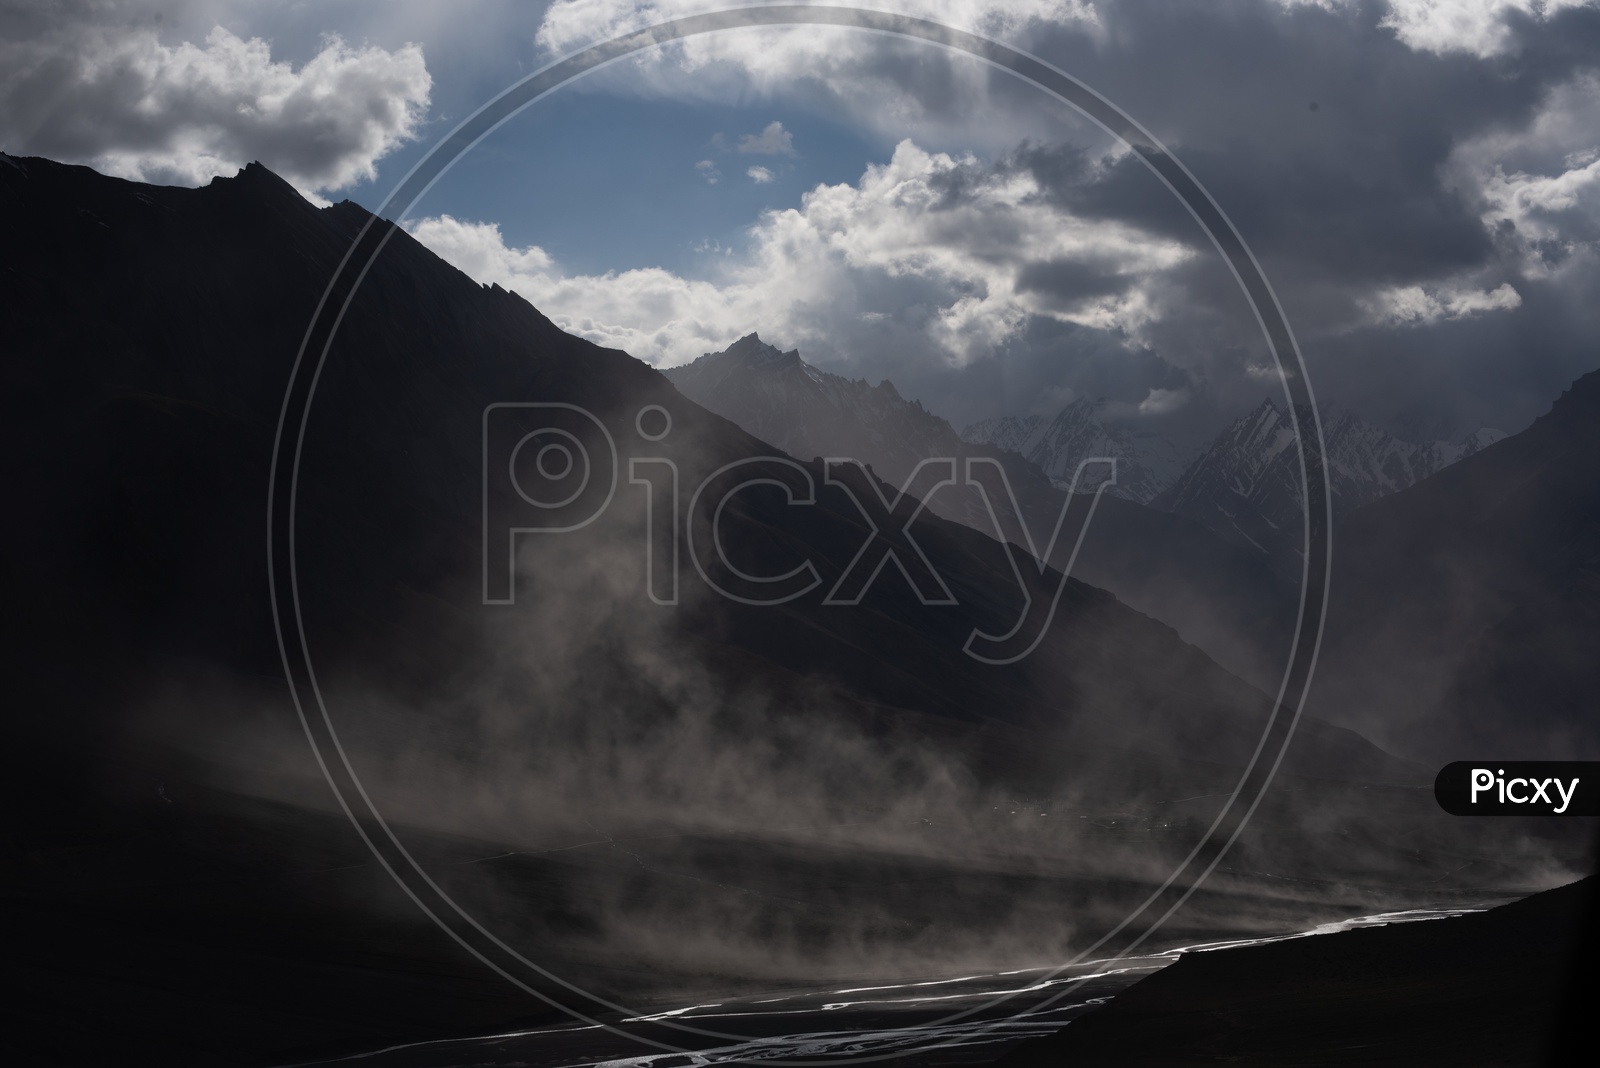 Mountain Valleys With Lake and Smog Over Water a Scenic View Of ladakh